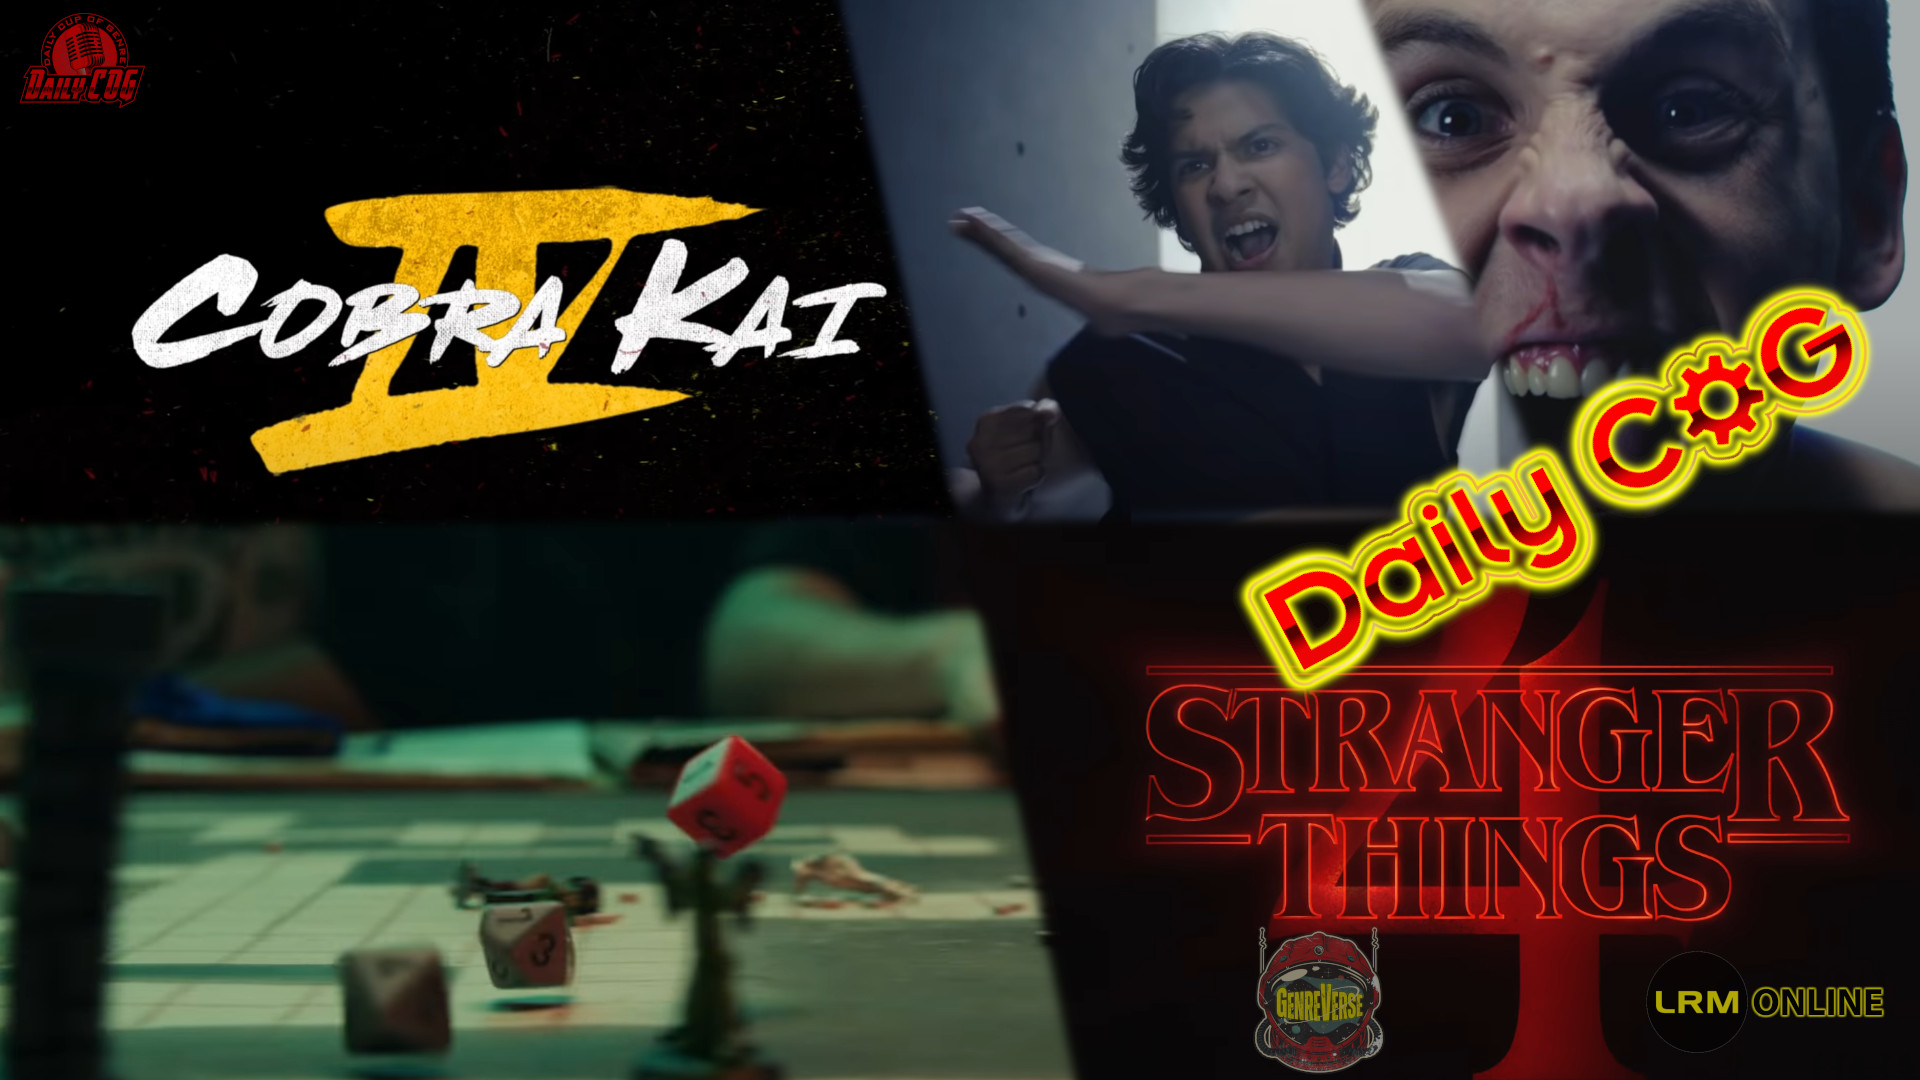 Netflix Not Out! Cobra Kai Season 4 Trailer Teases All Valley Tournament & The Stranger Things Season 4 Teaser Gets Us Hyped To Go Back To Hawkins Daily COG